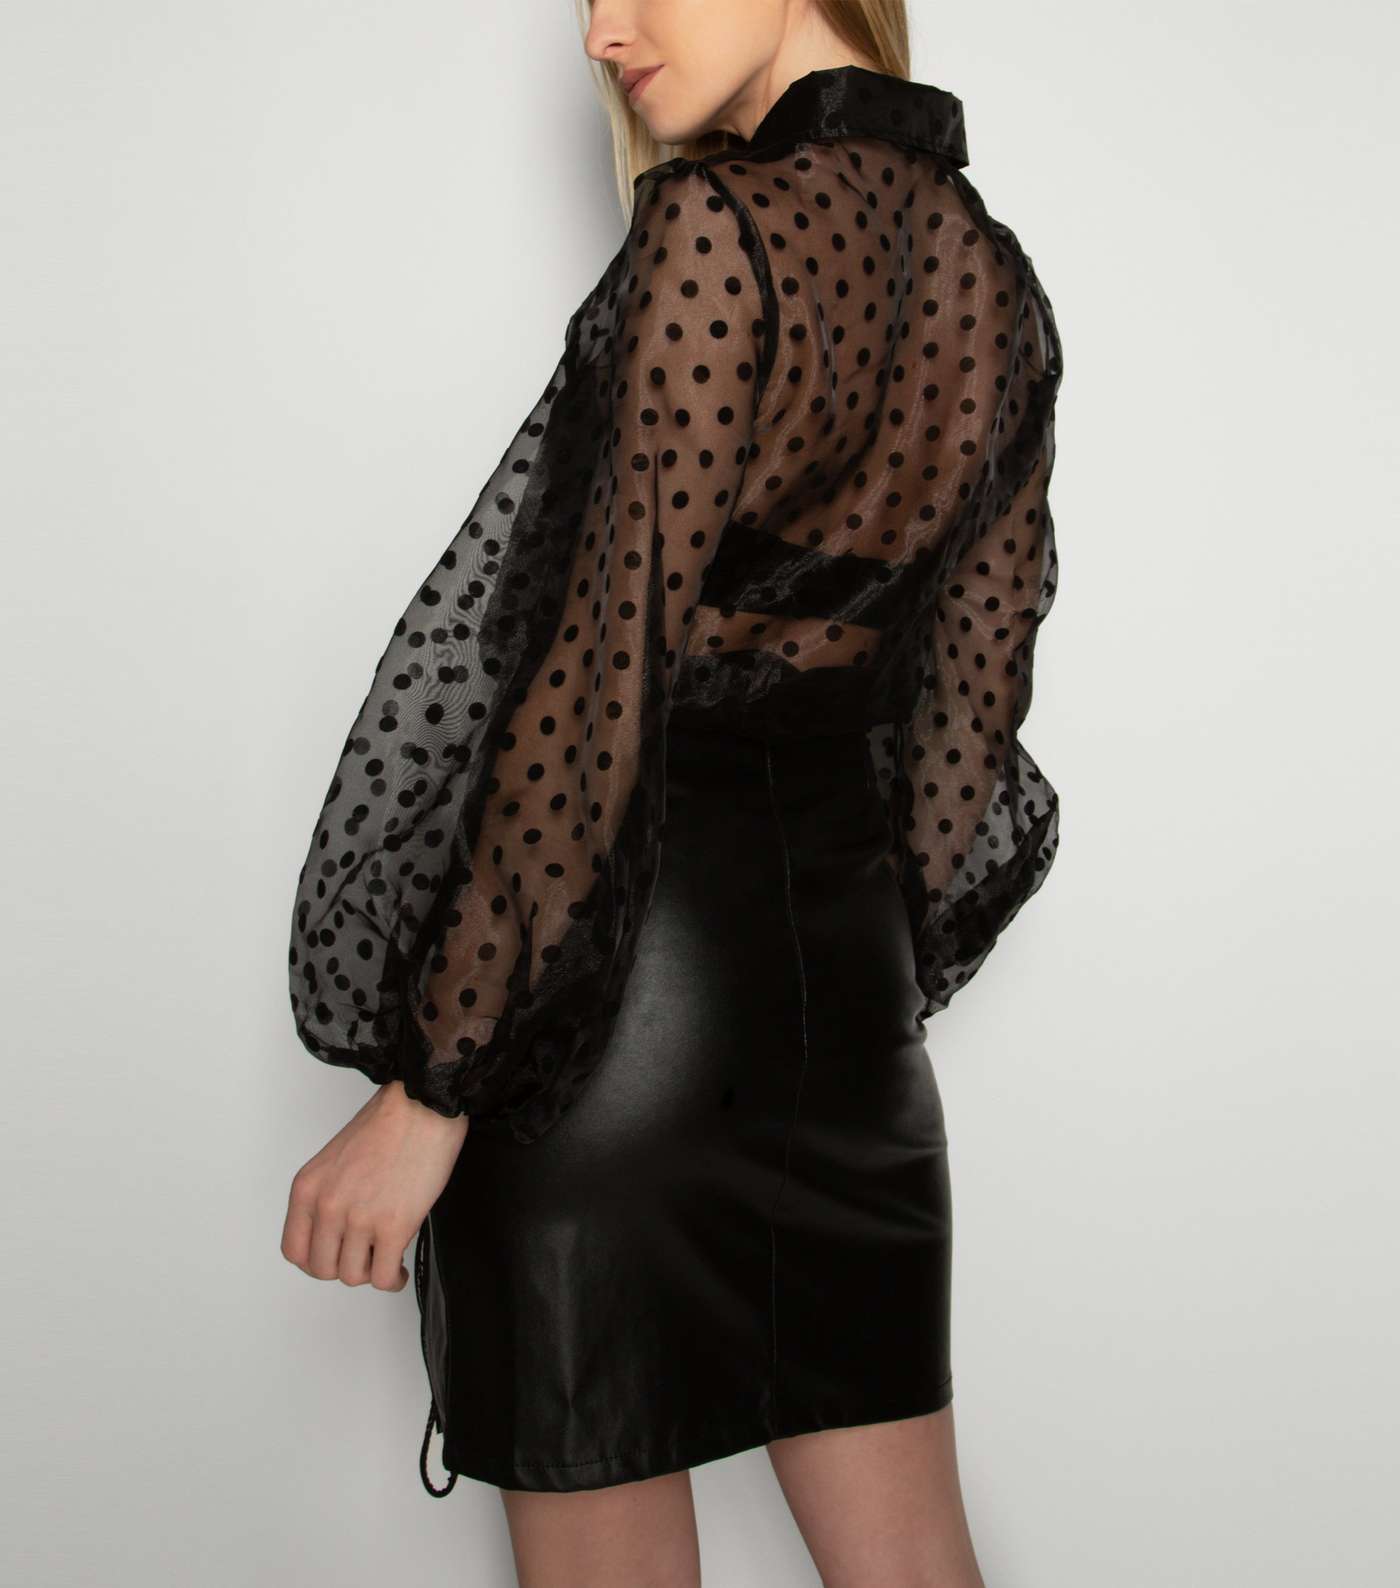 21st Mill Black Leather-Look Lace Up Skirt Image 3